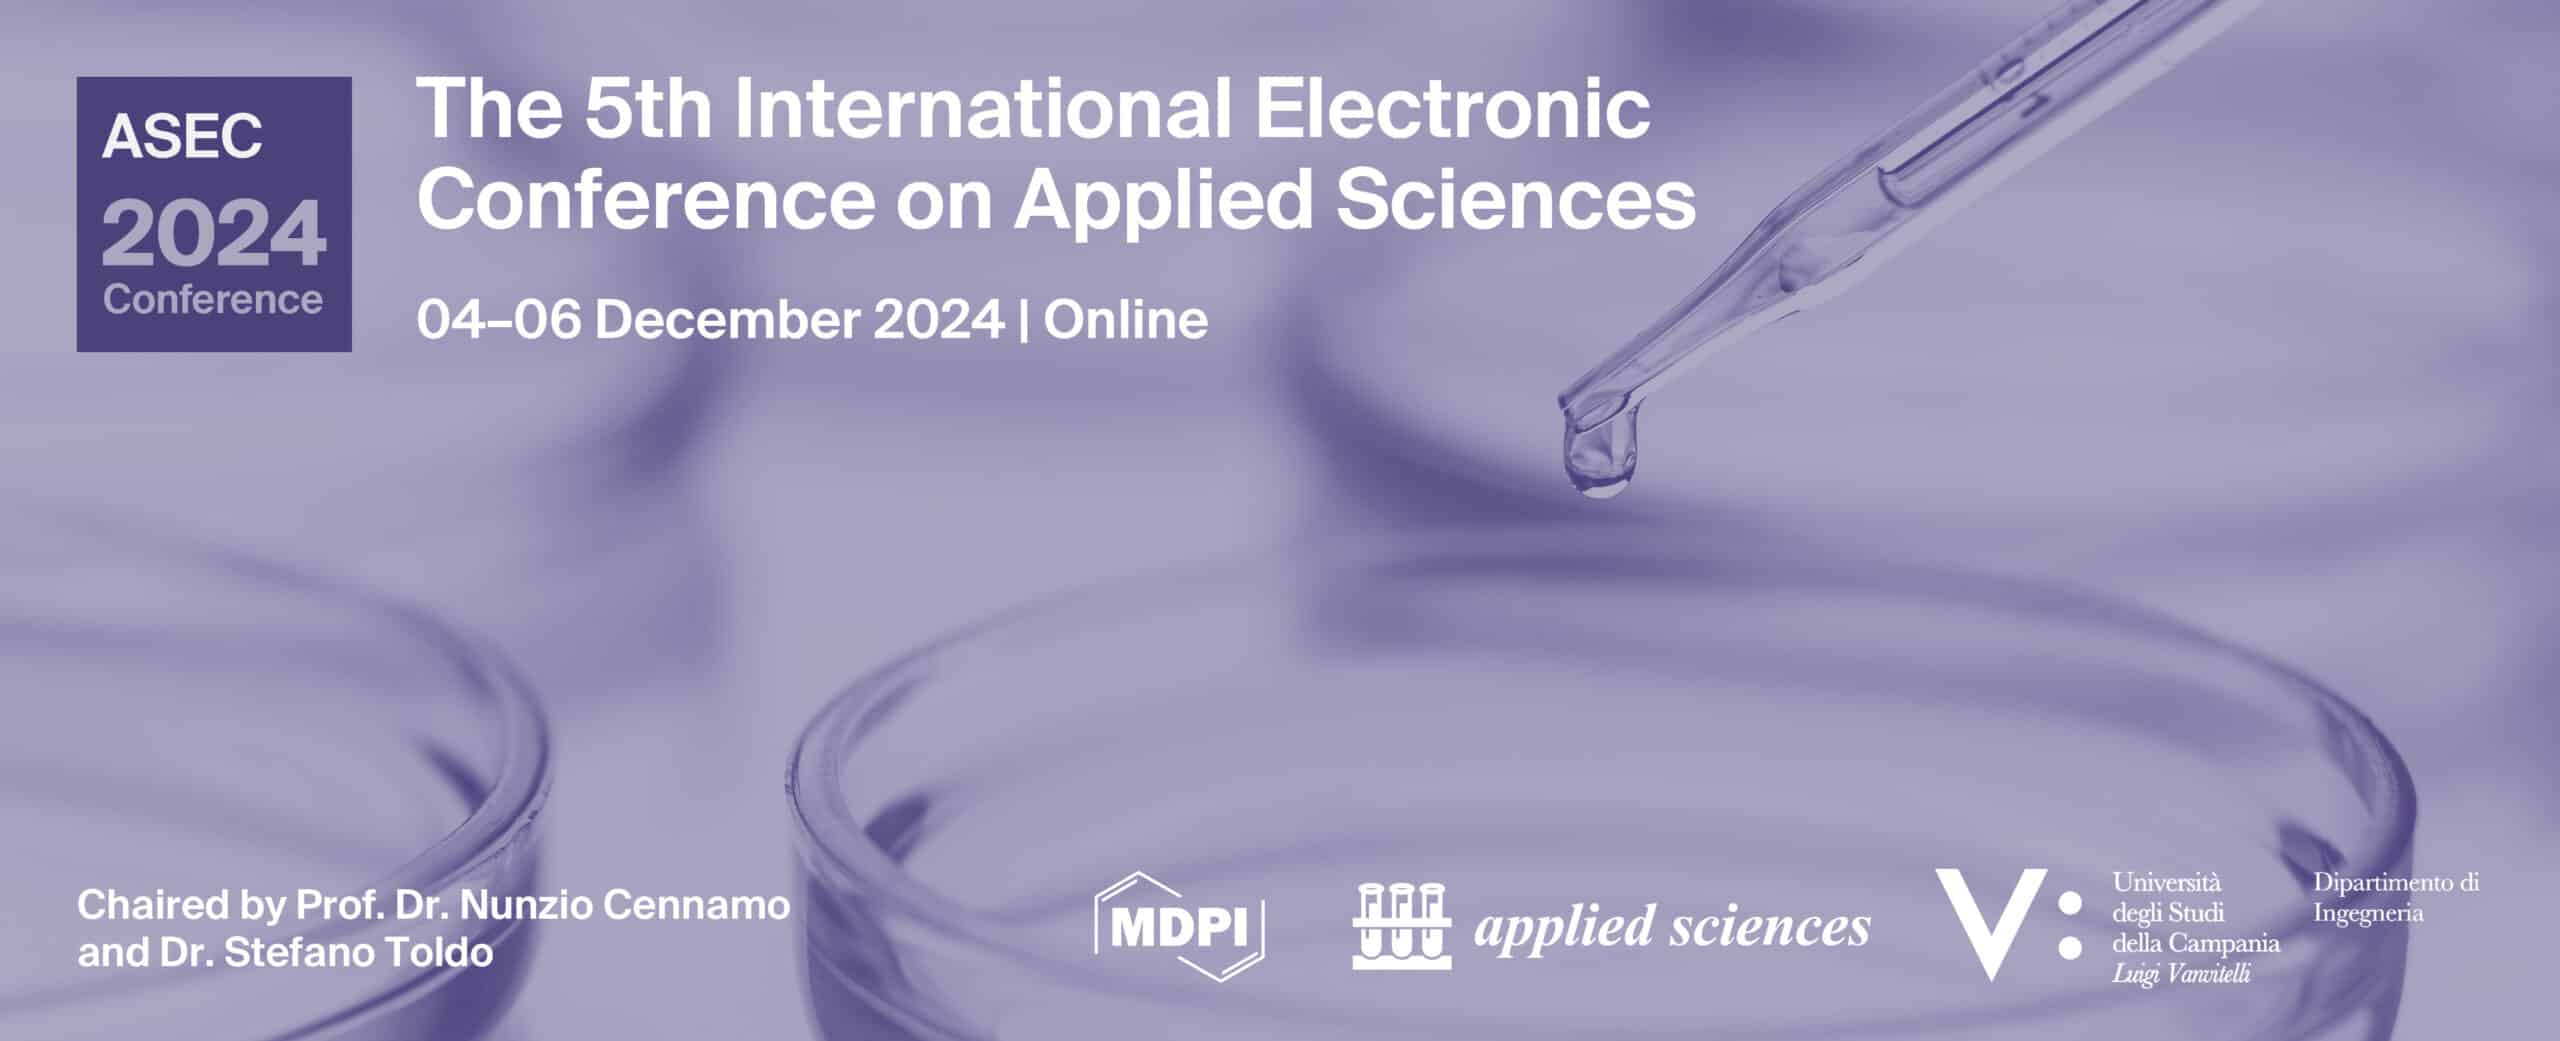 The 5th International Electronic Conference on Applied Sciences